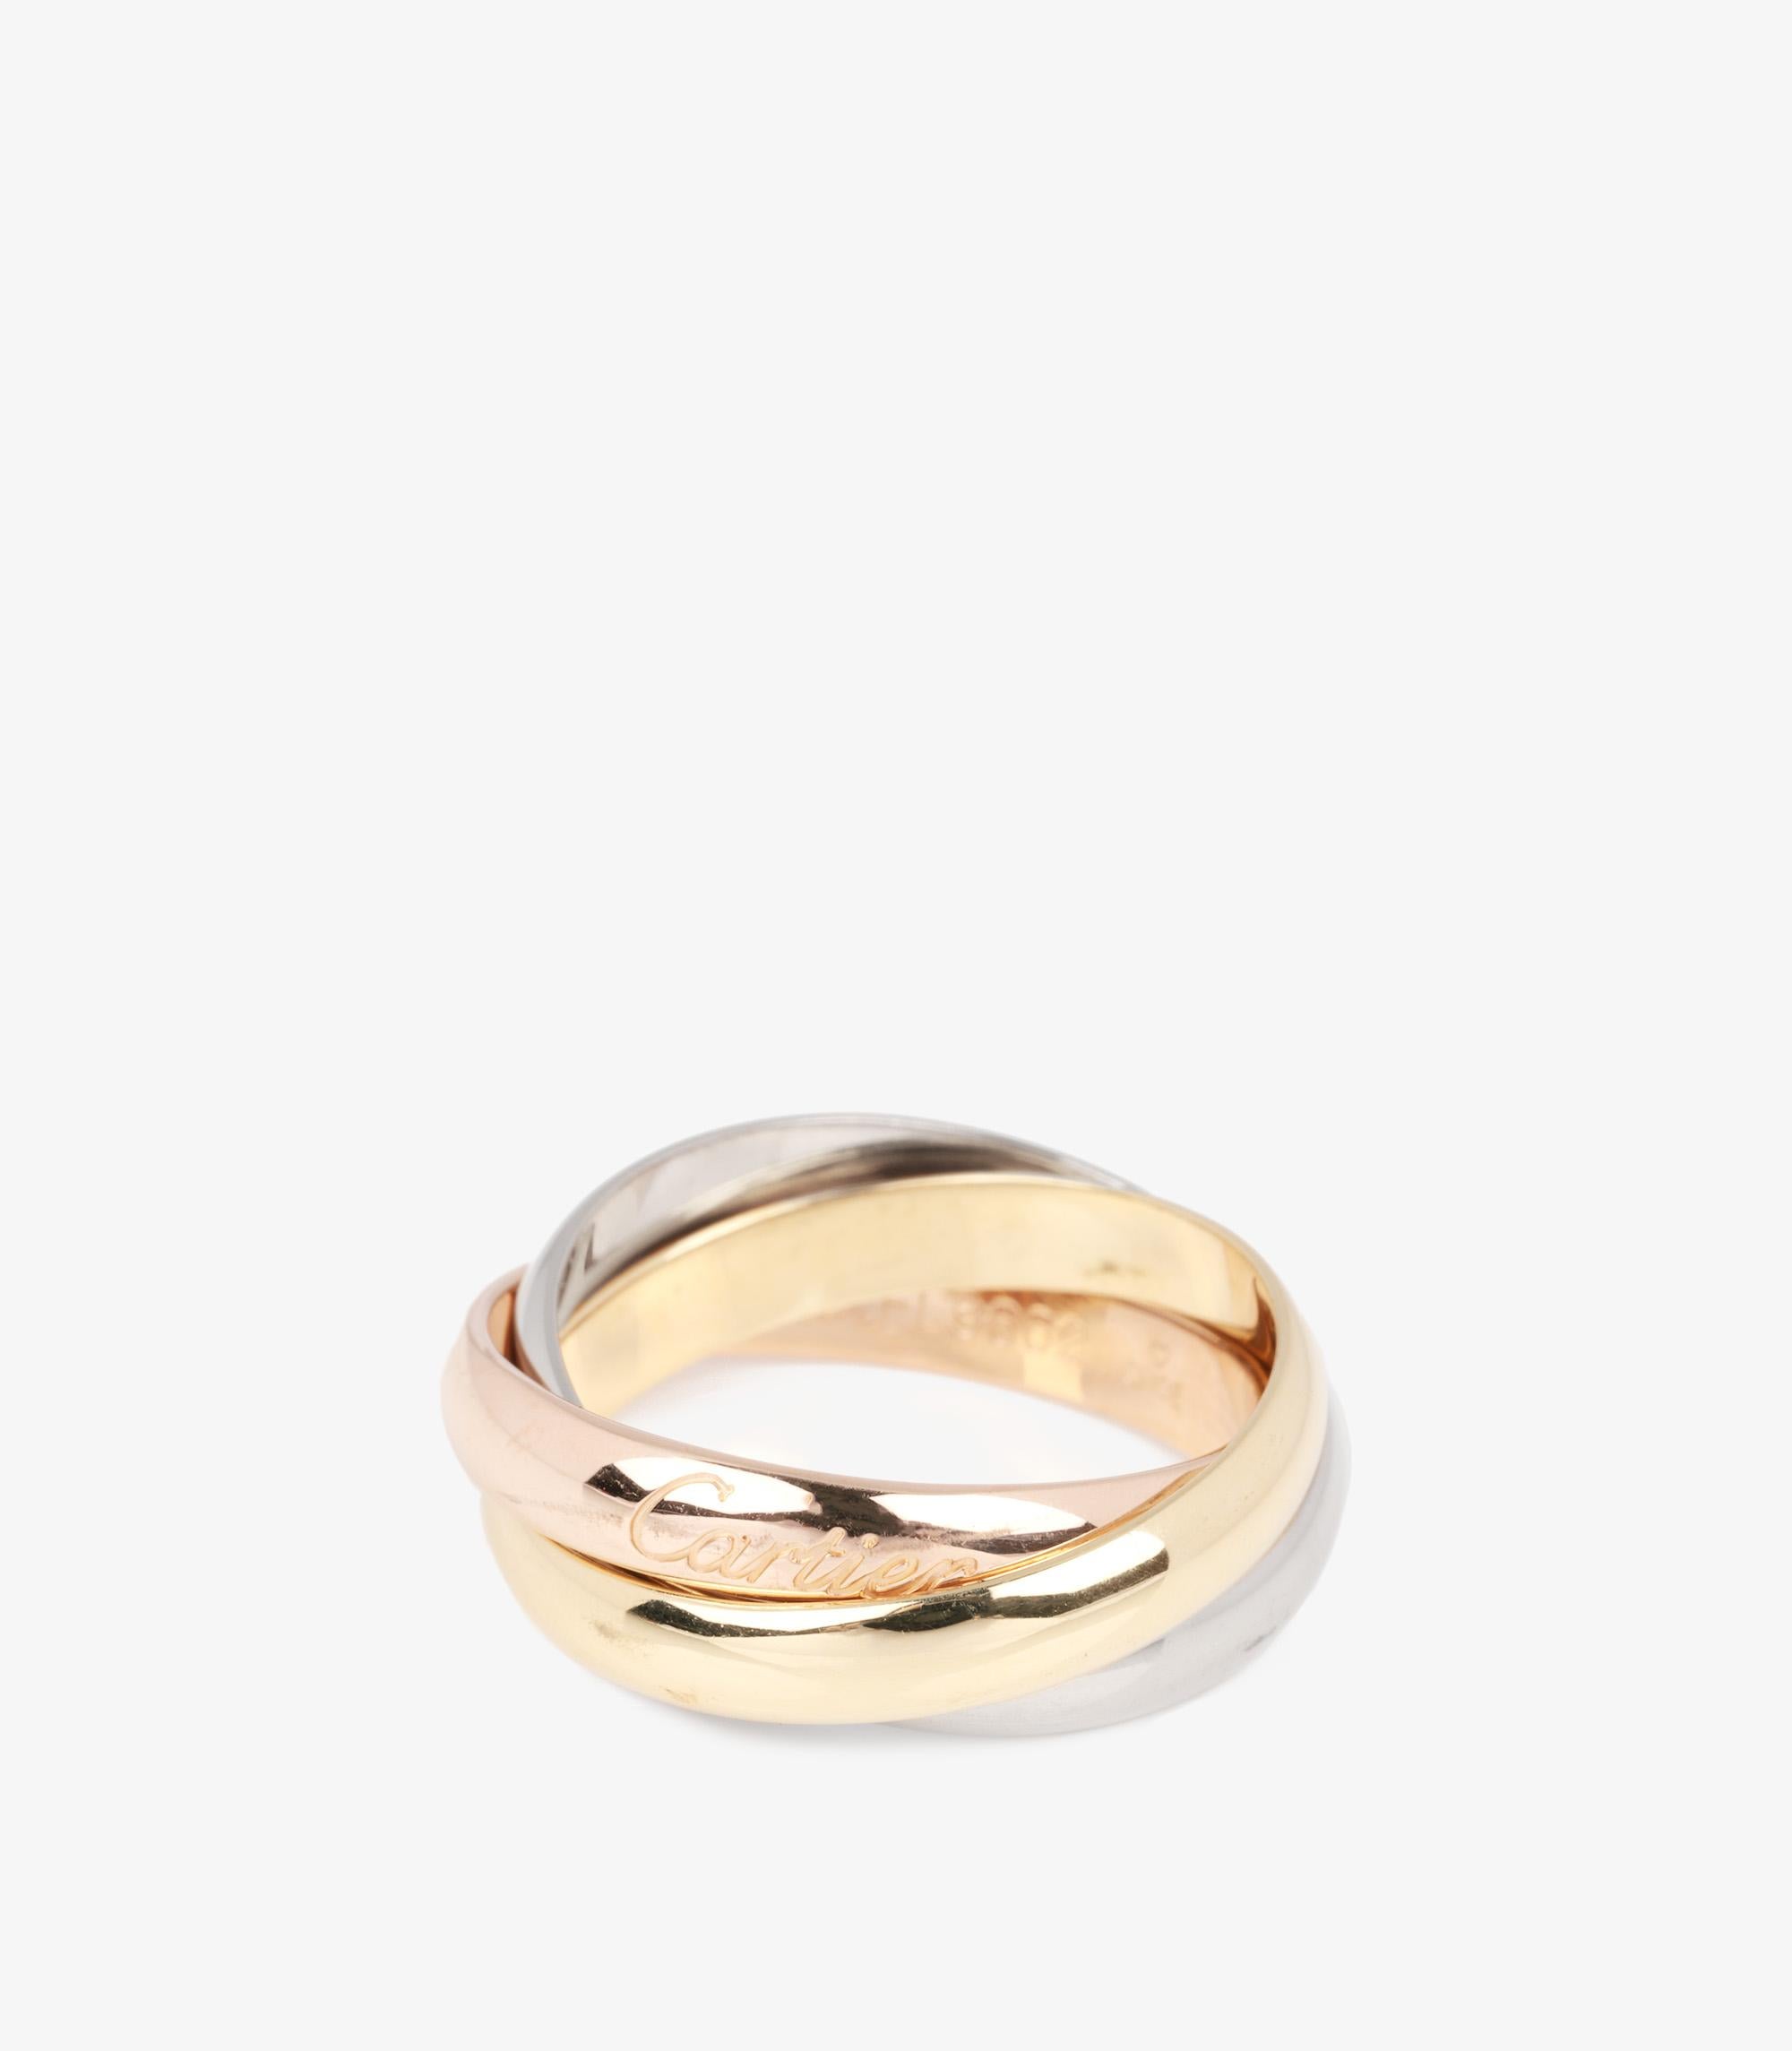 Cartier 18ct White Gold, 18ct Yellow Gold And 18ct Rose Gold Medium Trinity Ring

Brand- Cartier
Model- Medium Trinity Ring
Product Type- Ring
Serial Number- FL****
Material(s)- 18ct White Gold, 18ct Yellow Gold, 18ct Rose Gold
UK Ring Size- M 1/2